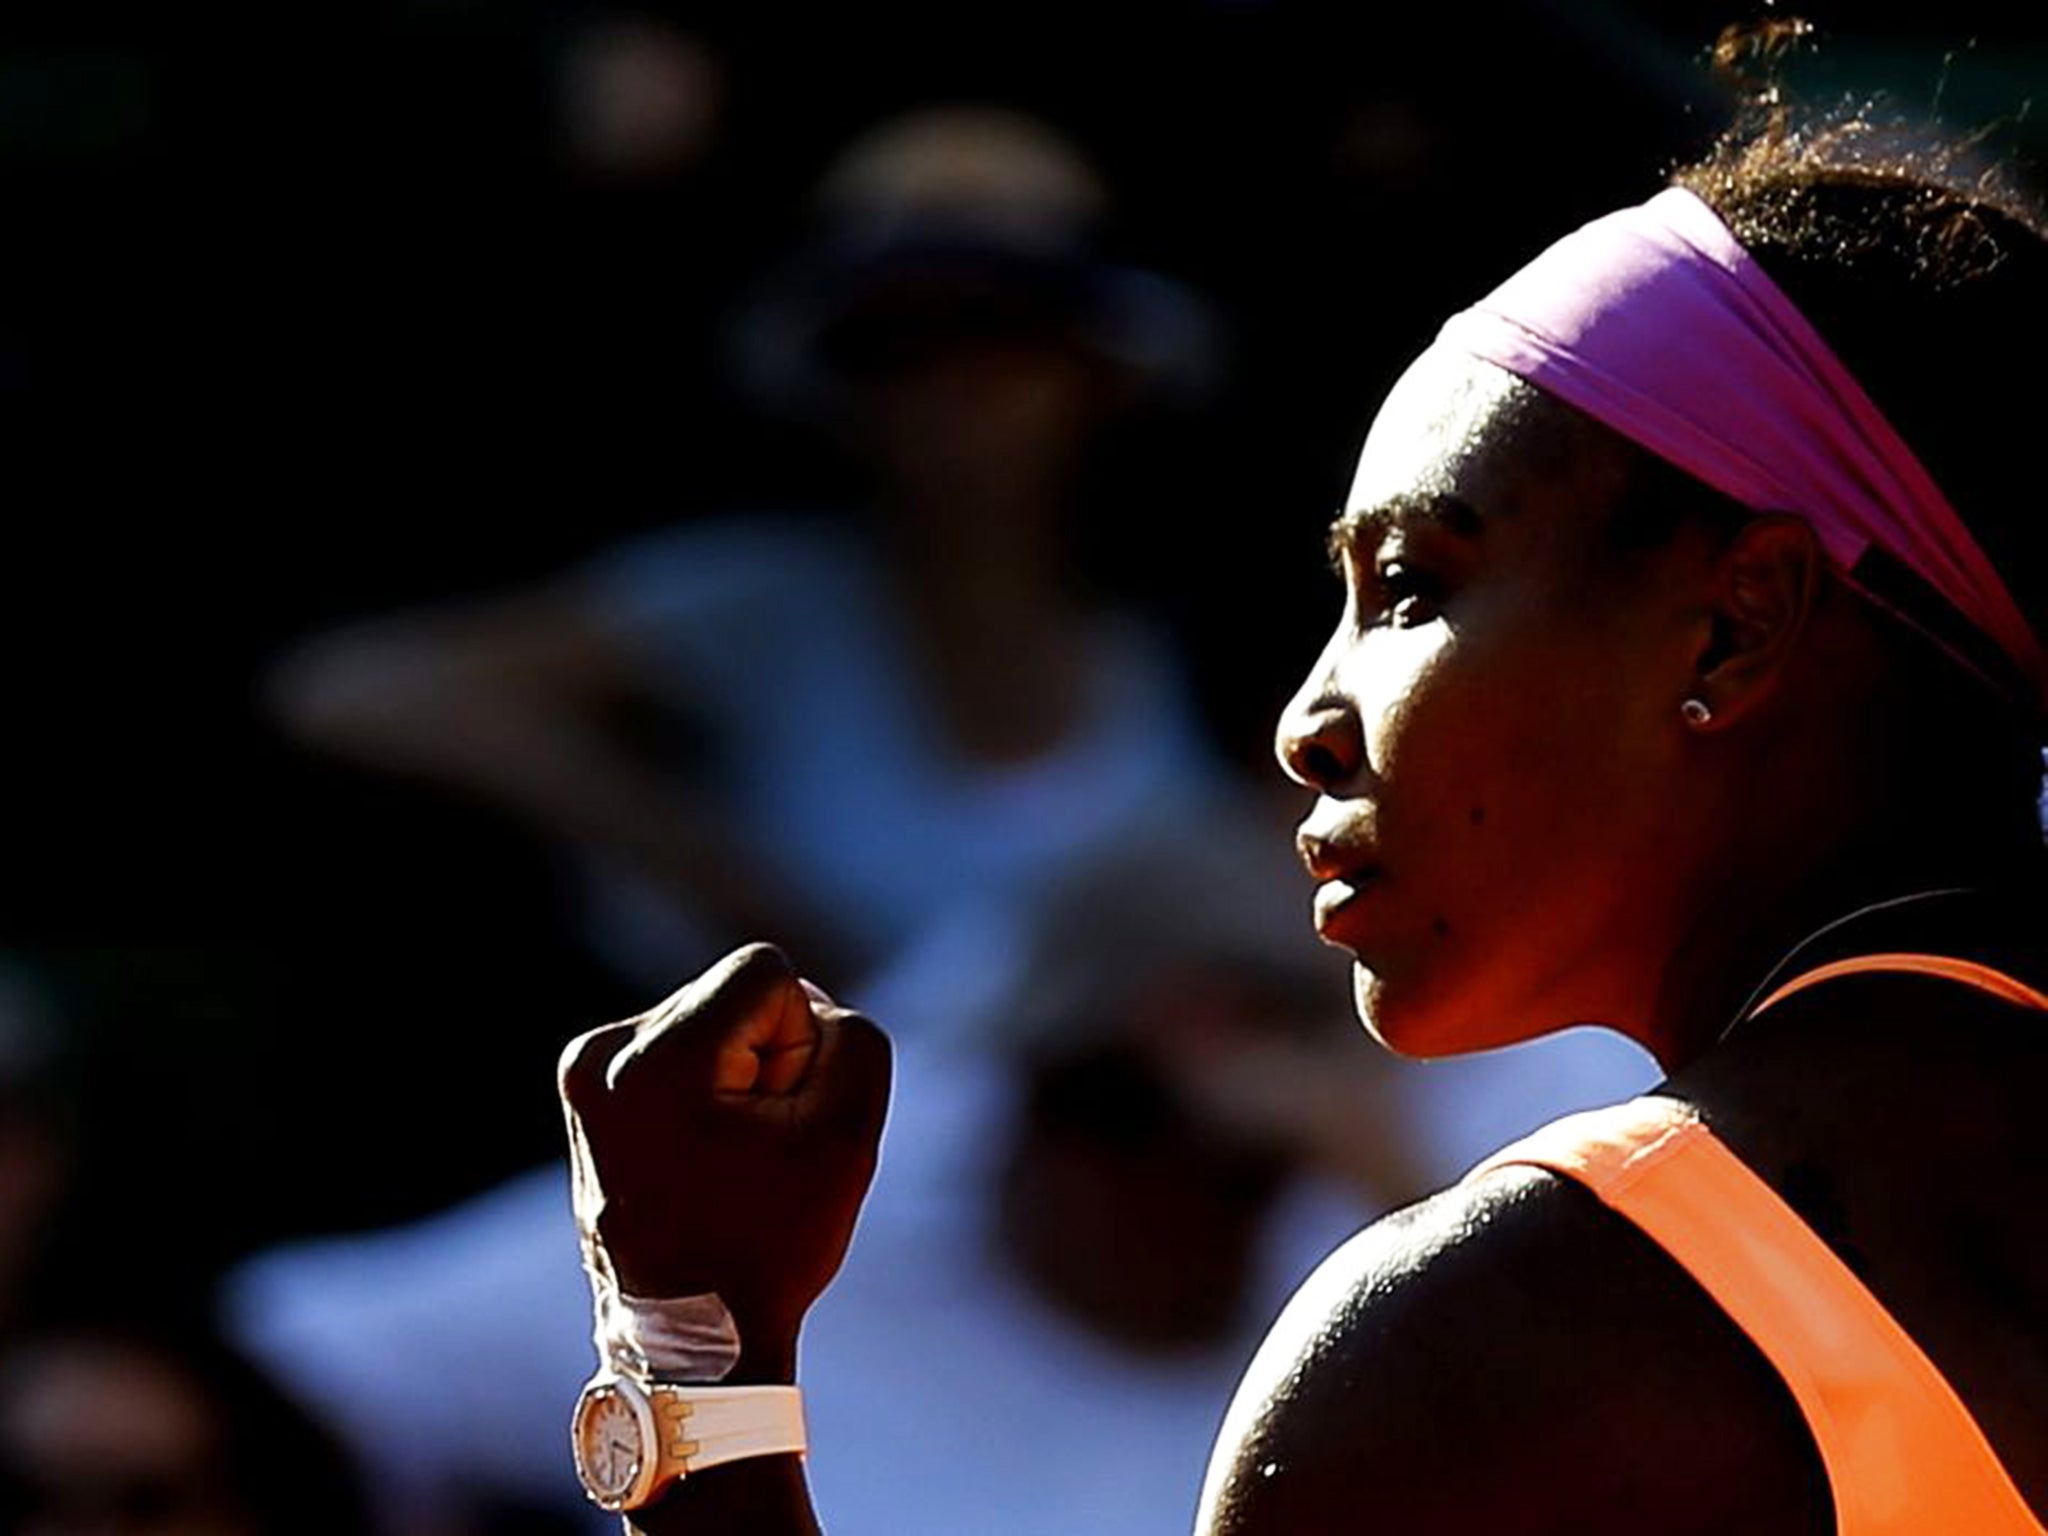 Serena Williams had to overcome illness to defeat Timea Bacsinszky on Thursday to reach the French Open final